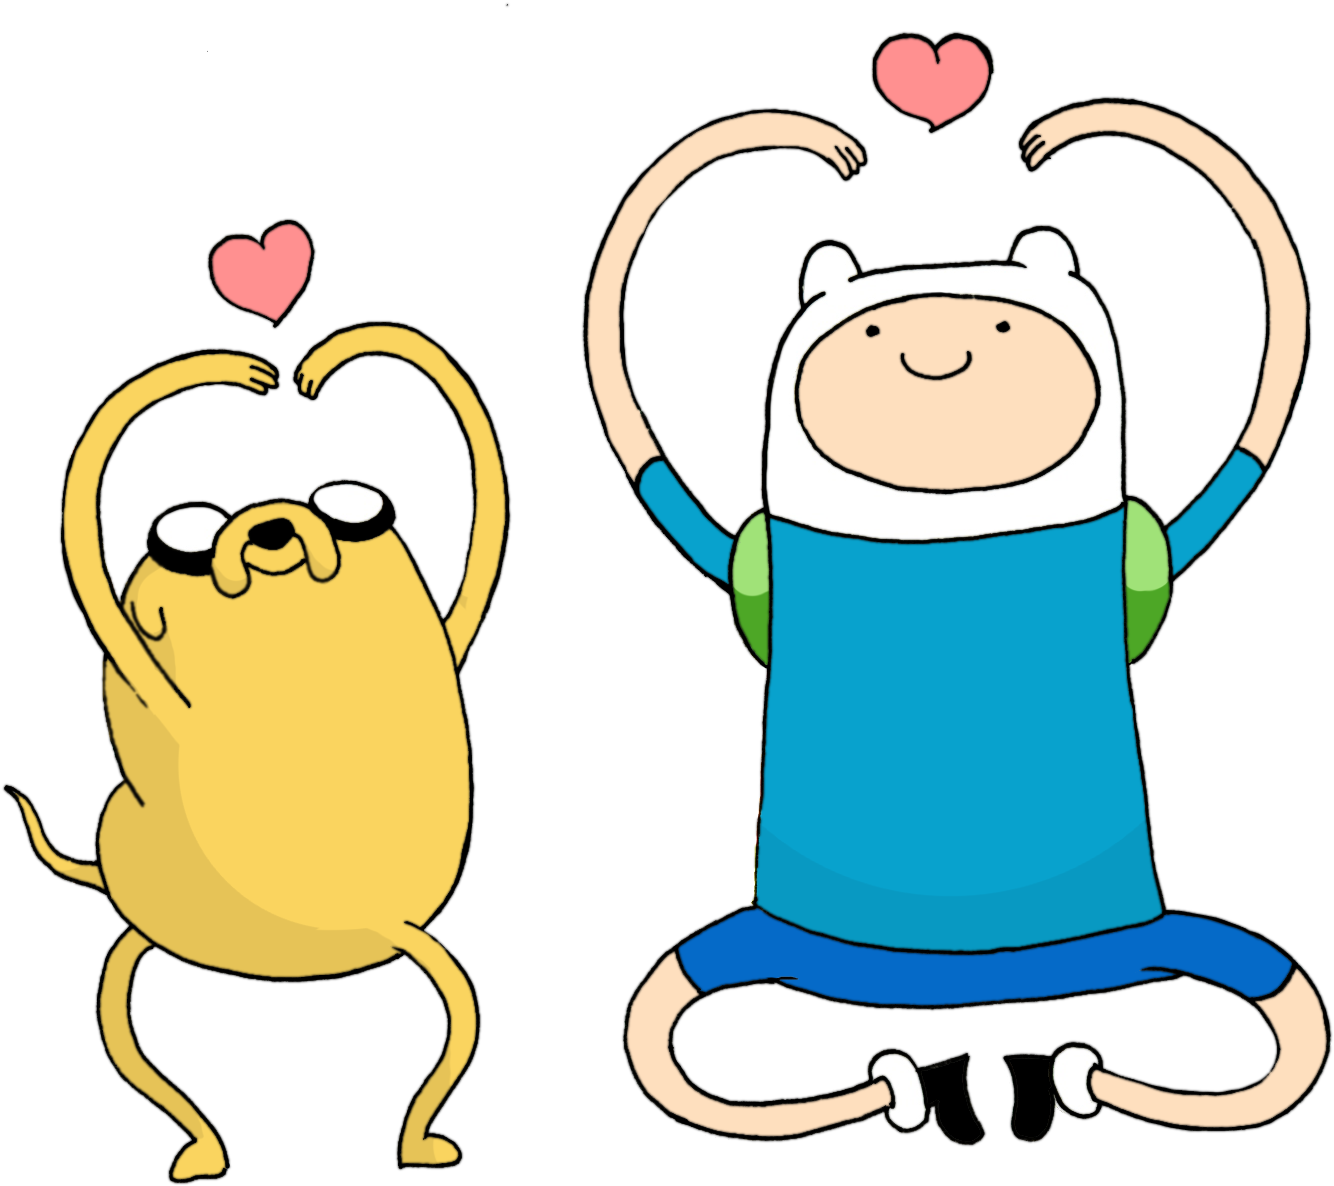 Adventure Time Finnand Jake Friendship PNG image